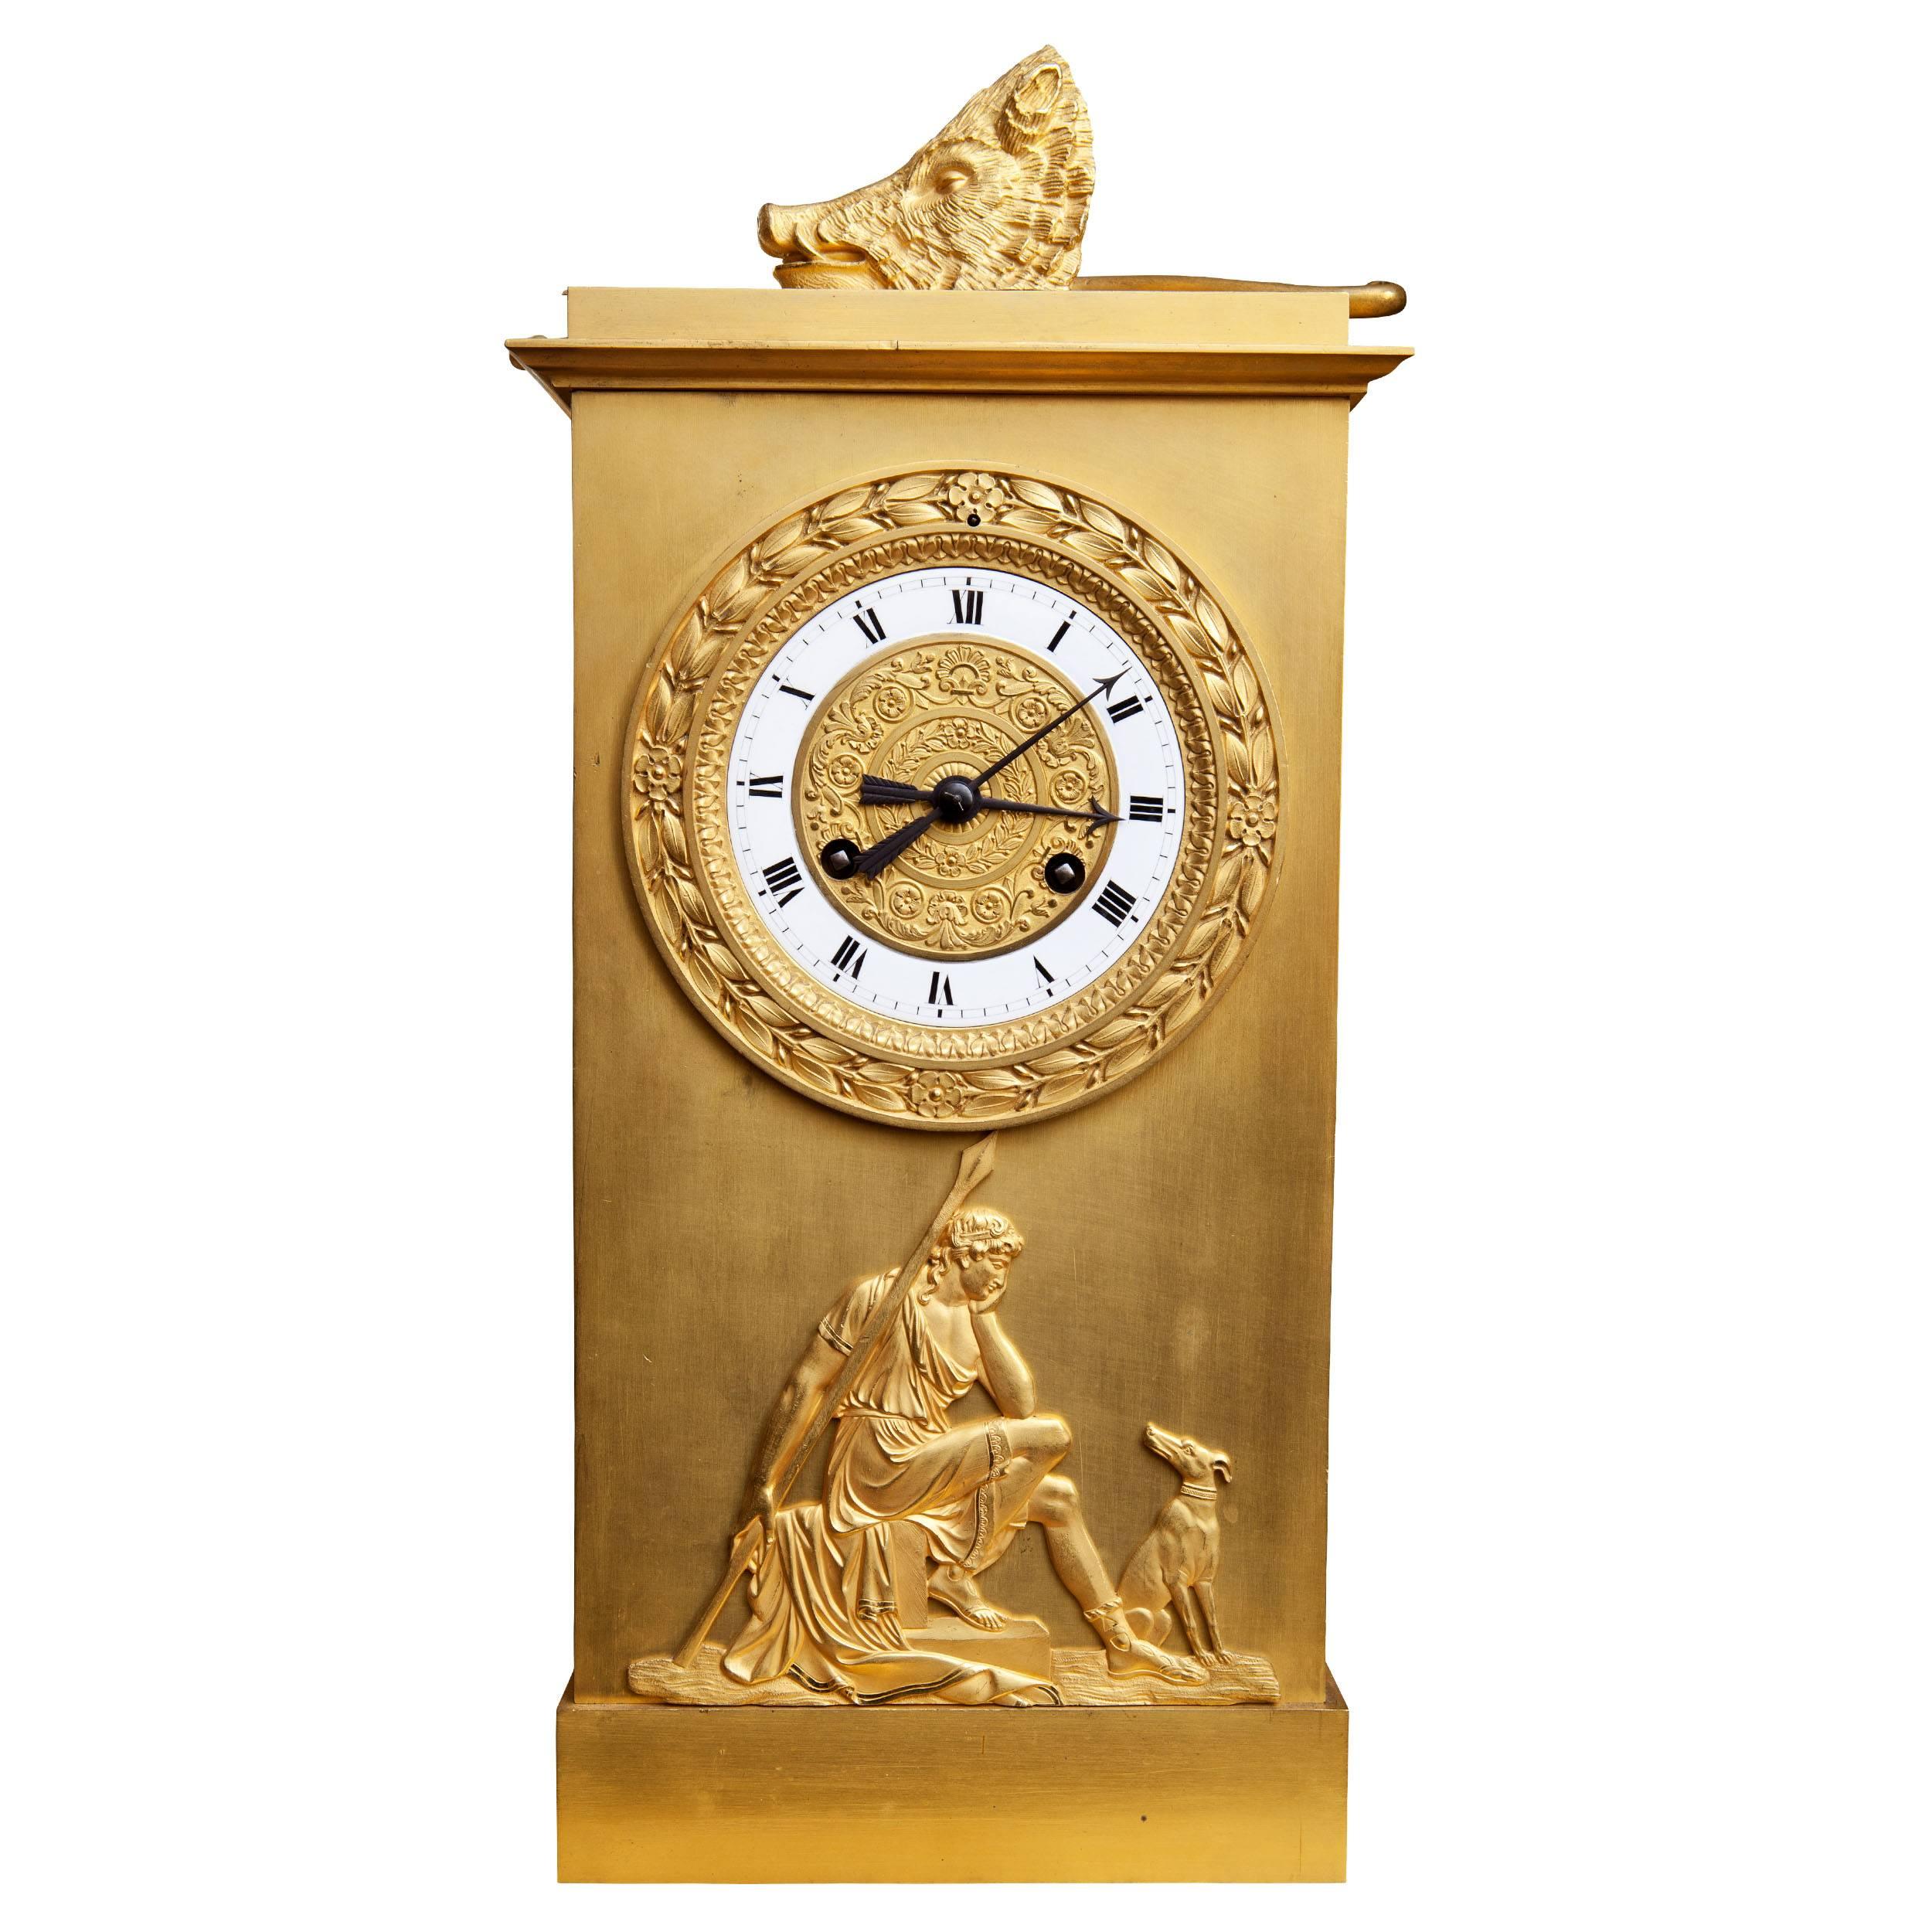 France, circa 1820-1830.

A large-scale early 19th century bronze and gilt bronze mantel clock, the clocks hunting theme, featuring three different scenes. The bronze Diana deer stalking; her bow, arrow, horn and a boar’s head show what has been